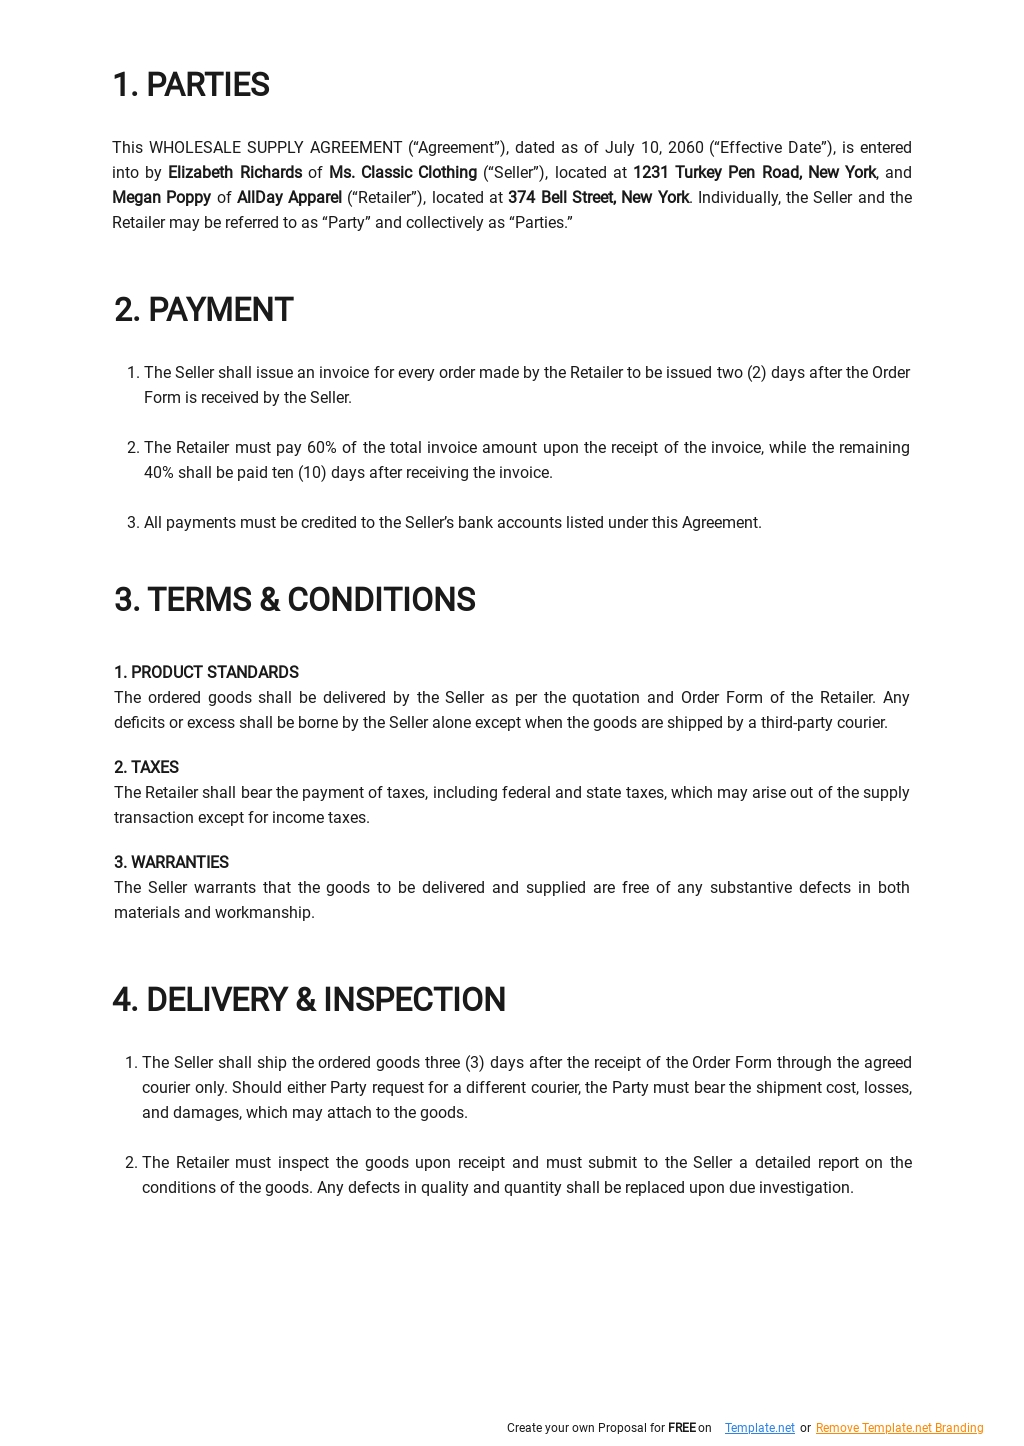 Wholesale Supply Agreement Template  1.jpe